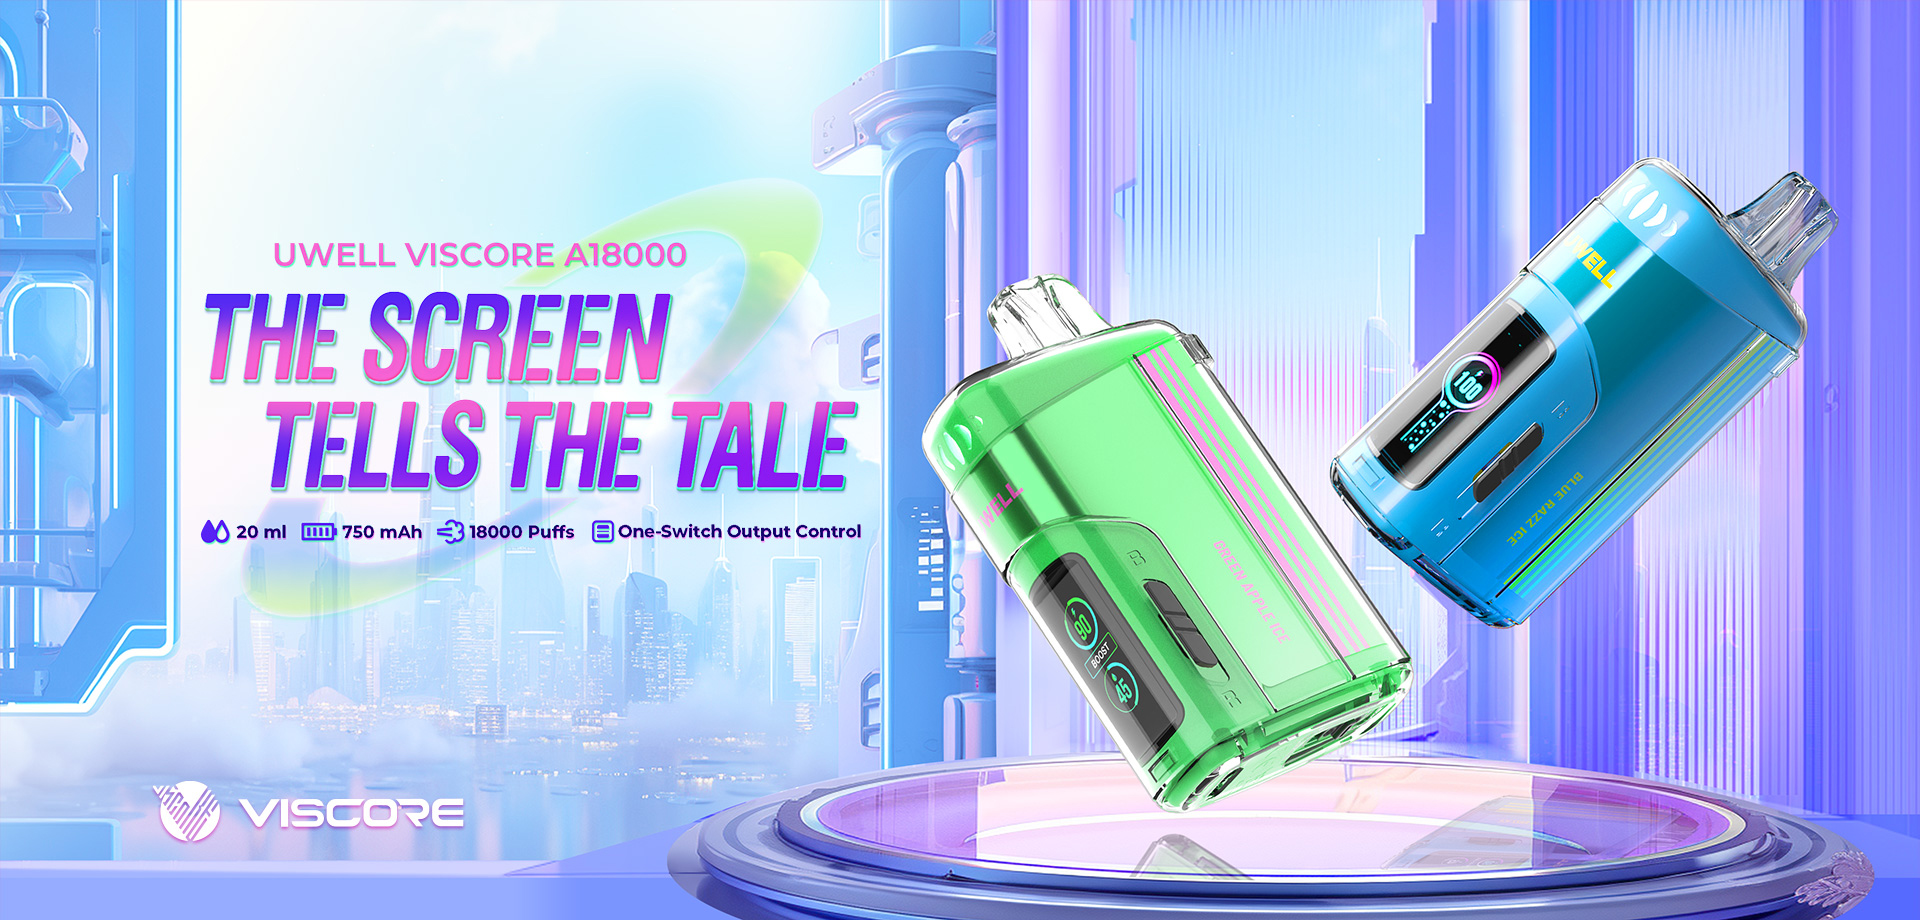 UWELL Unveils the VISCORE A18000